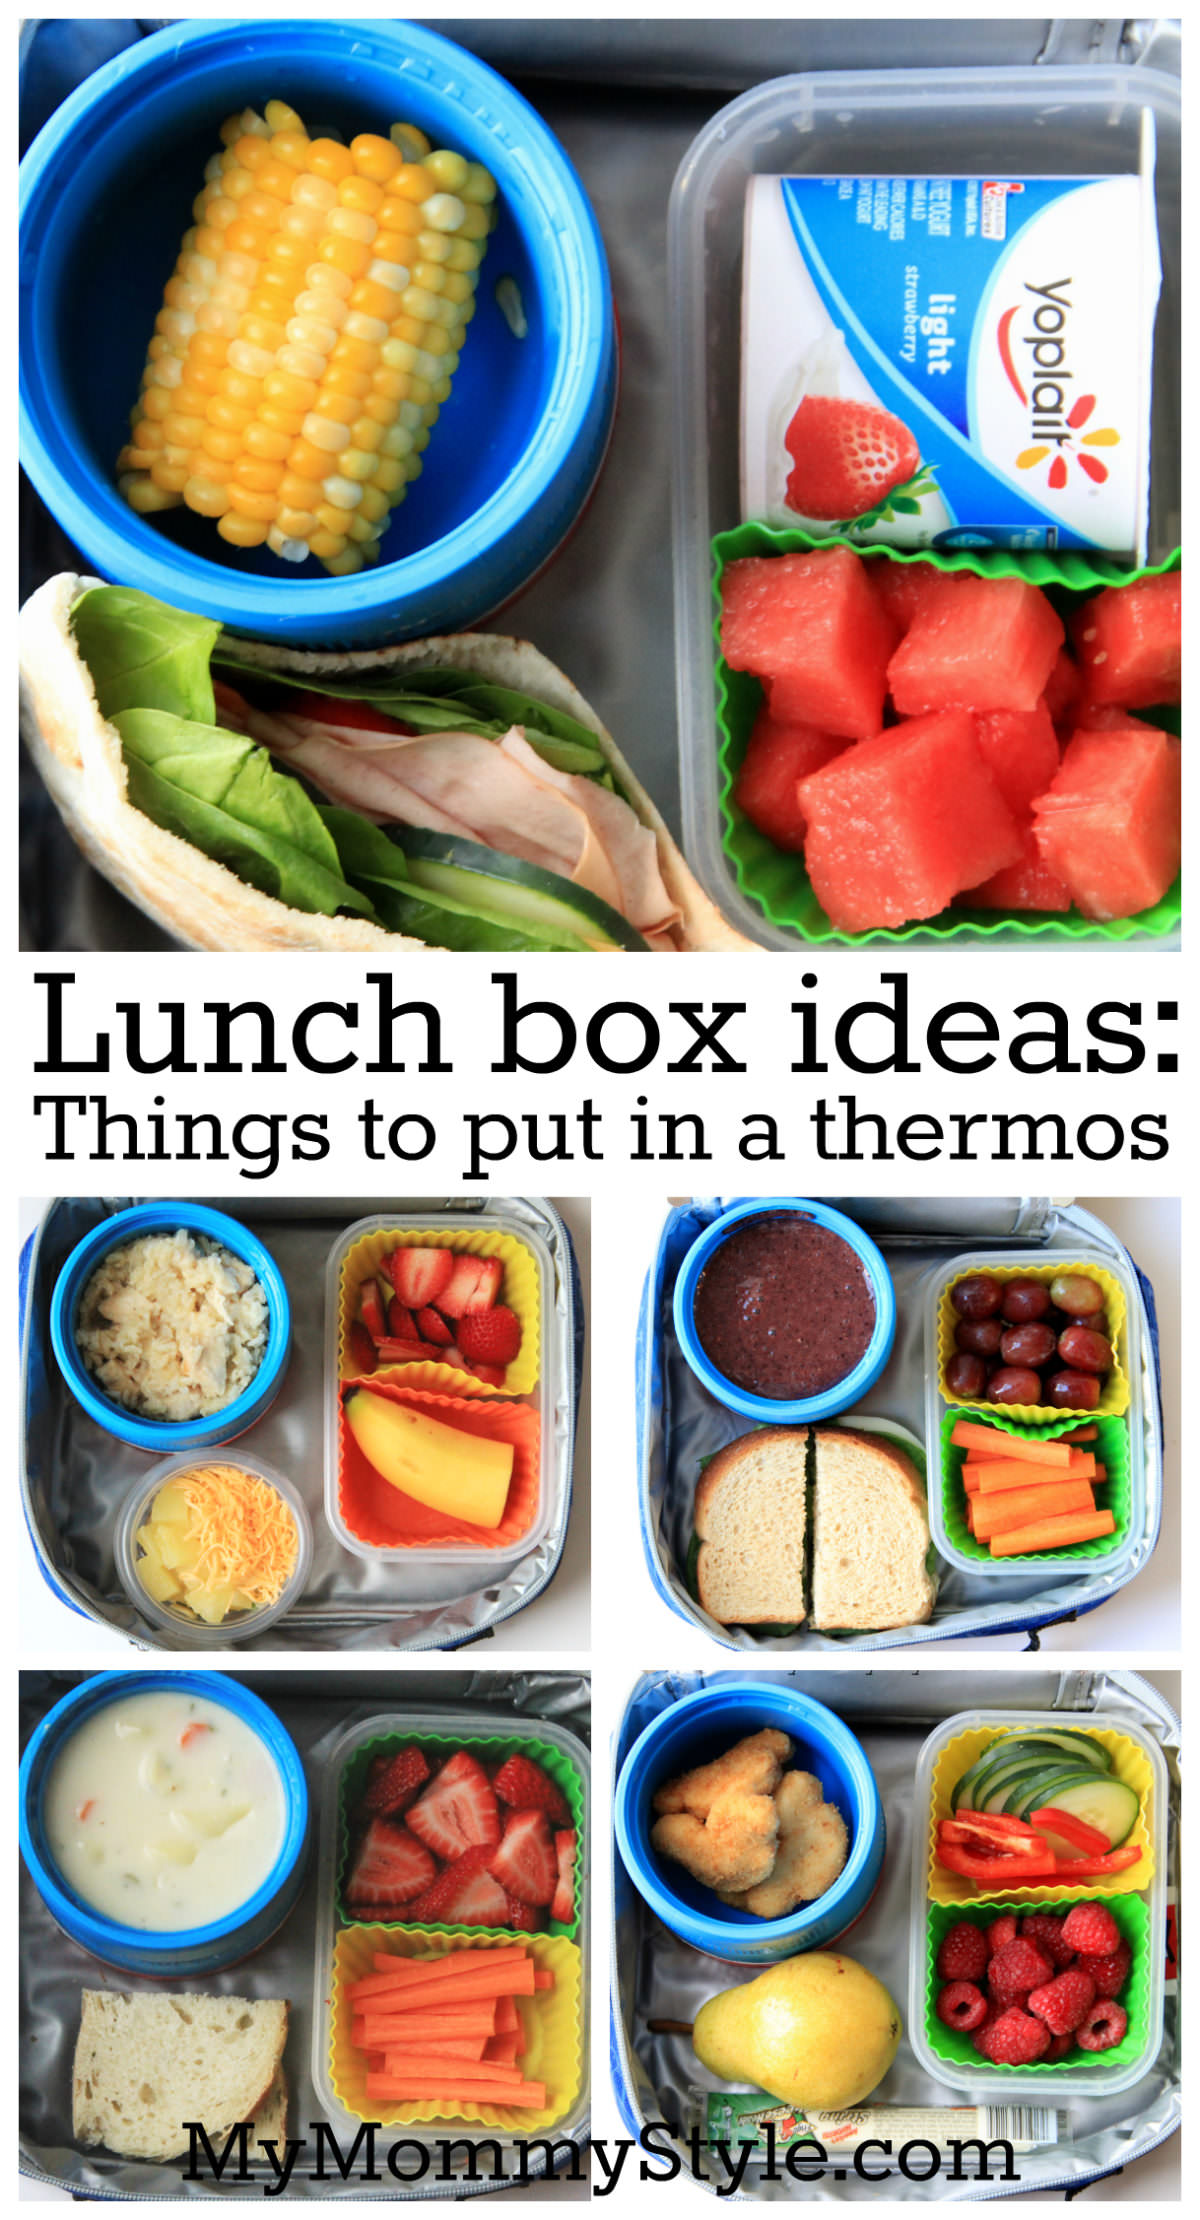 https://www.mymommystyle.com/wp-content/uploads/2013/09/things-to-put-in-a-thermos-thermos-how-to-pick-out-a-thermos-what-is-the-best-thermos-lunch-box-ideas-school-lunch.jpg